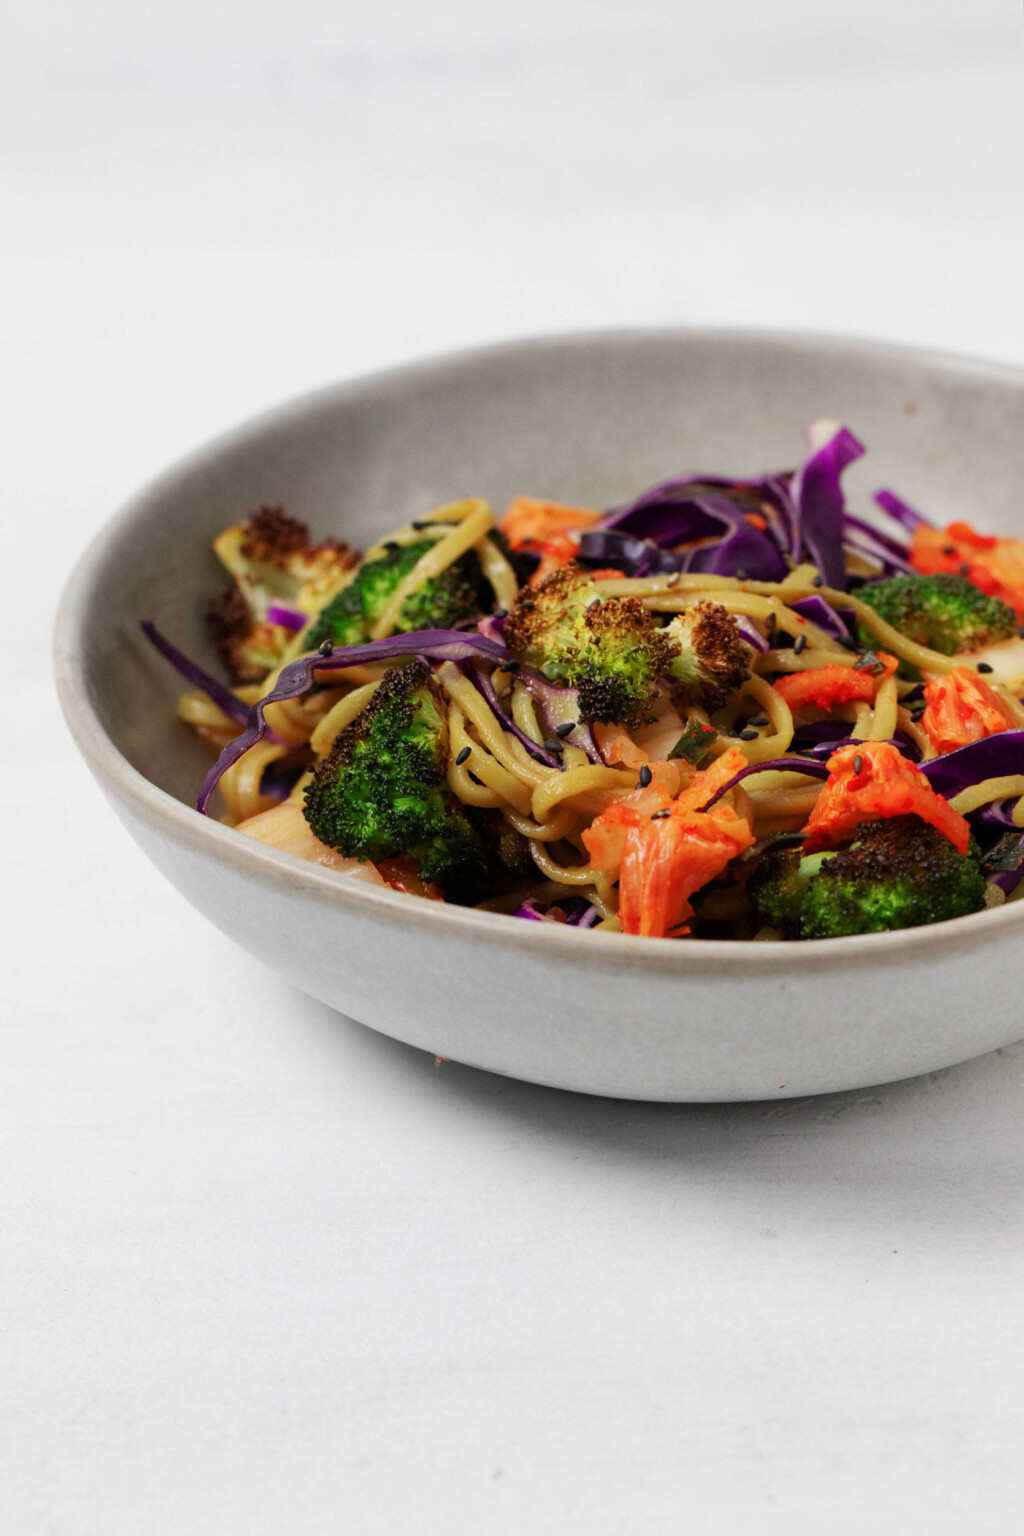 A gray ceramic bowl holds cooked noodles and a bright mixture of raw and cooked vegetables. It rests on a white surface.